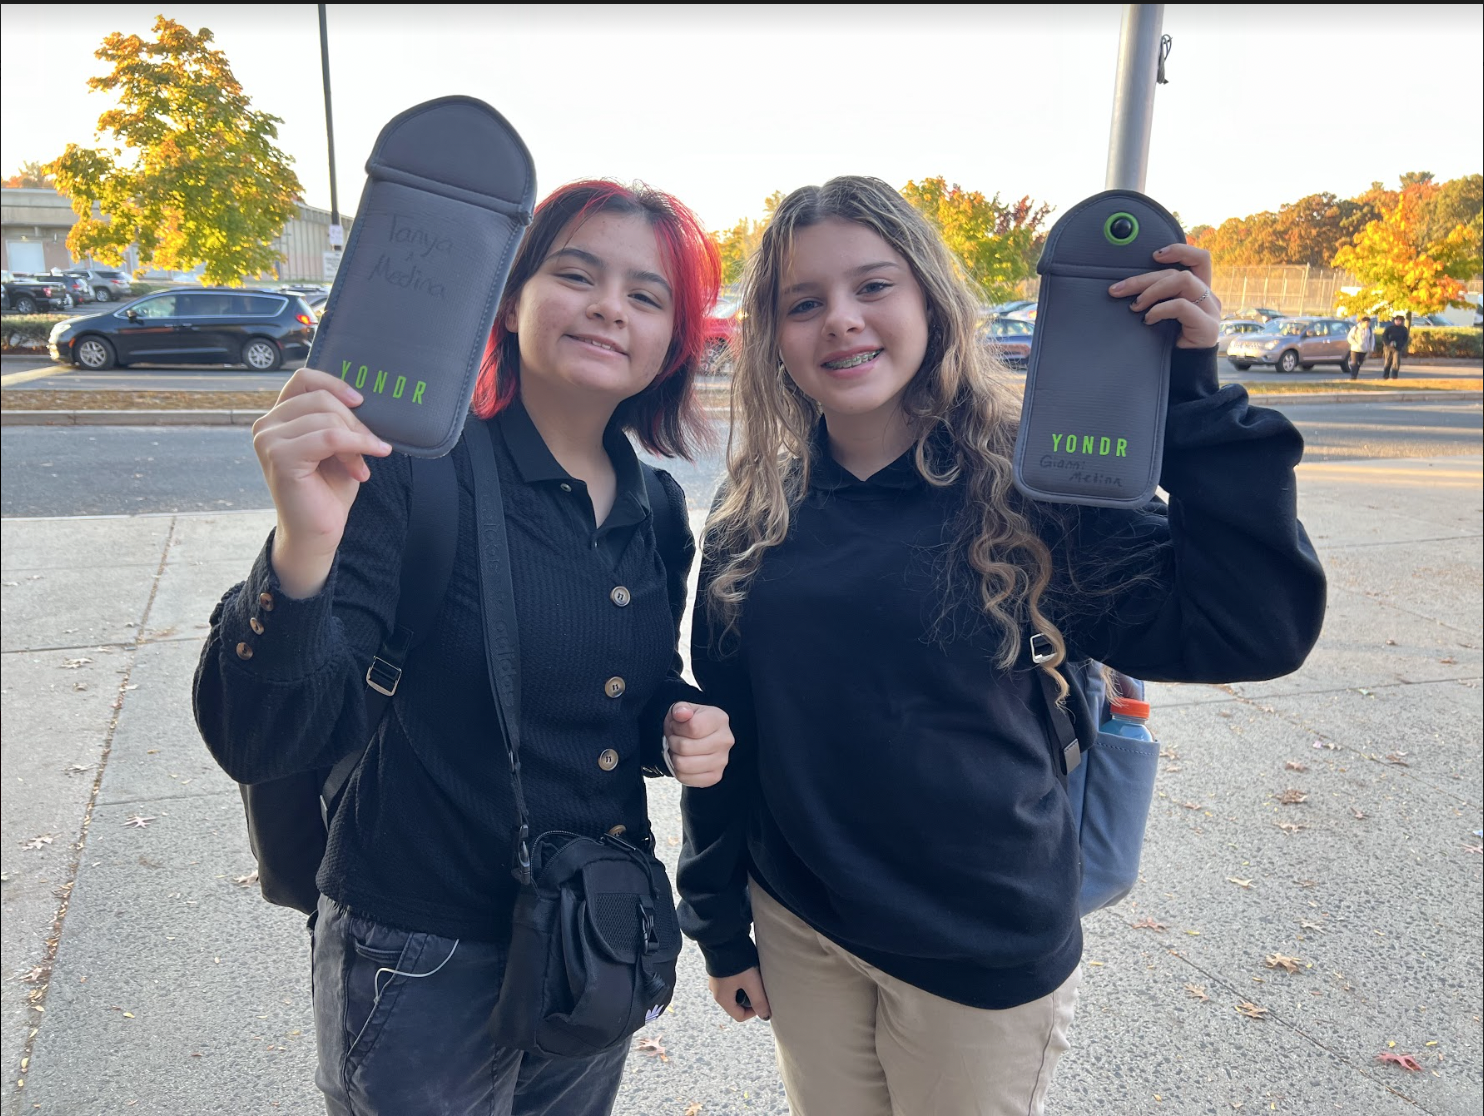 Springfield students flip on phone pouches, now saying program